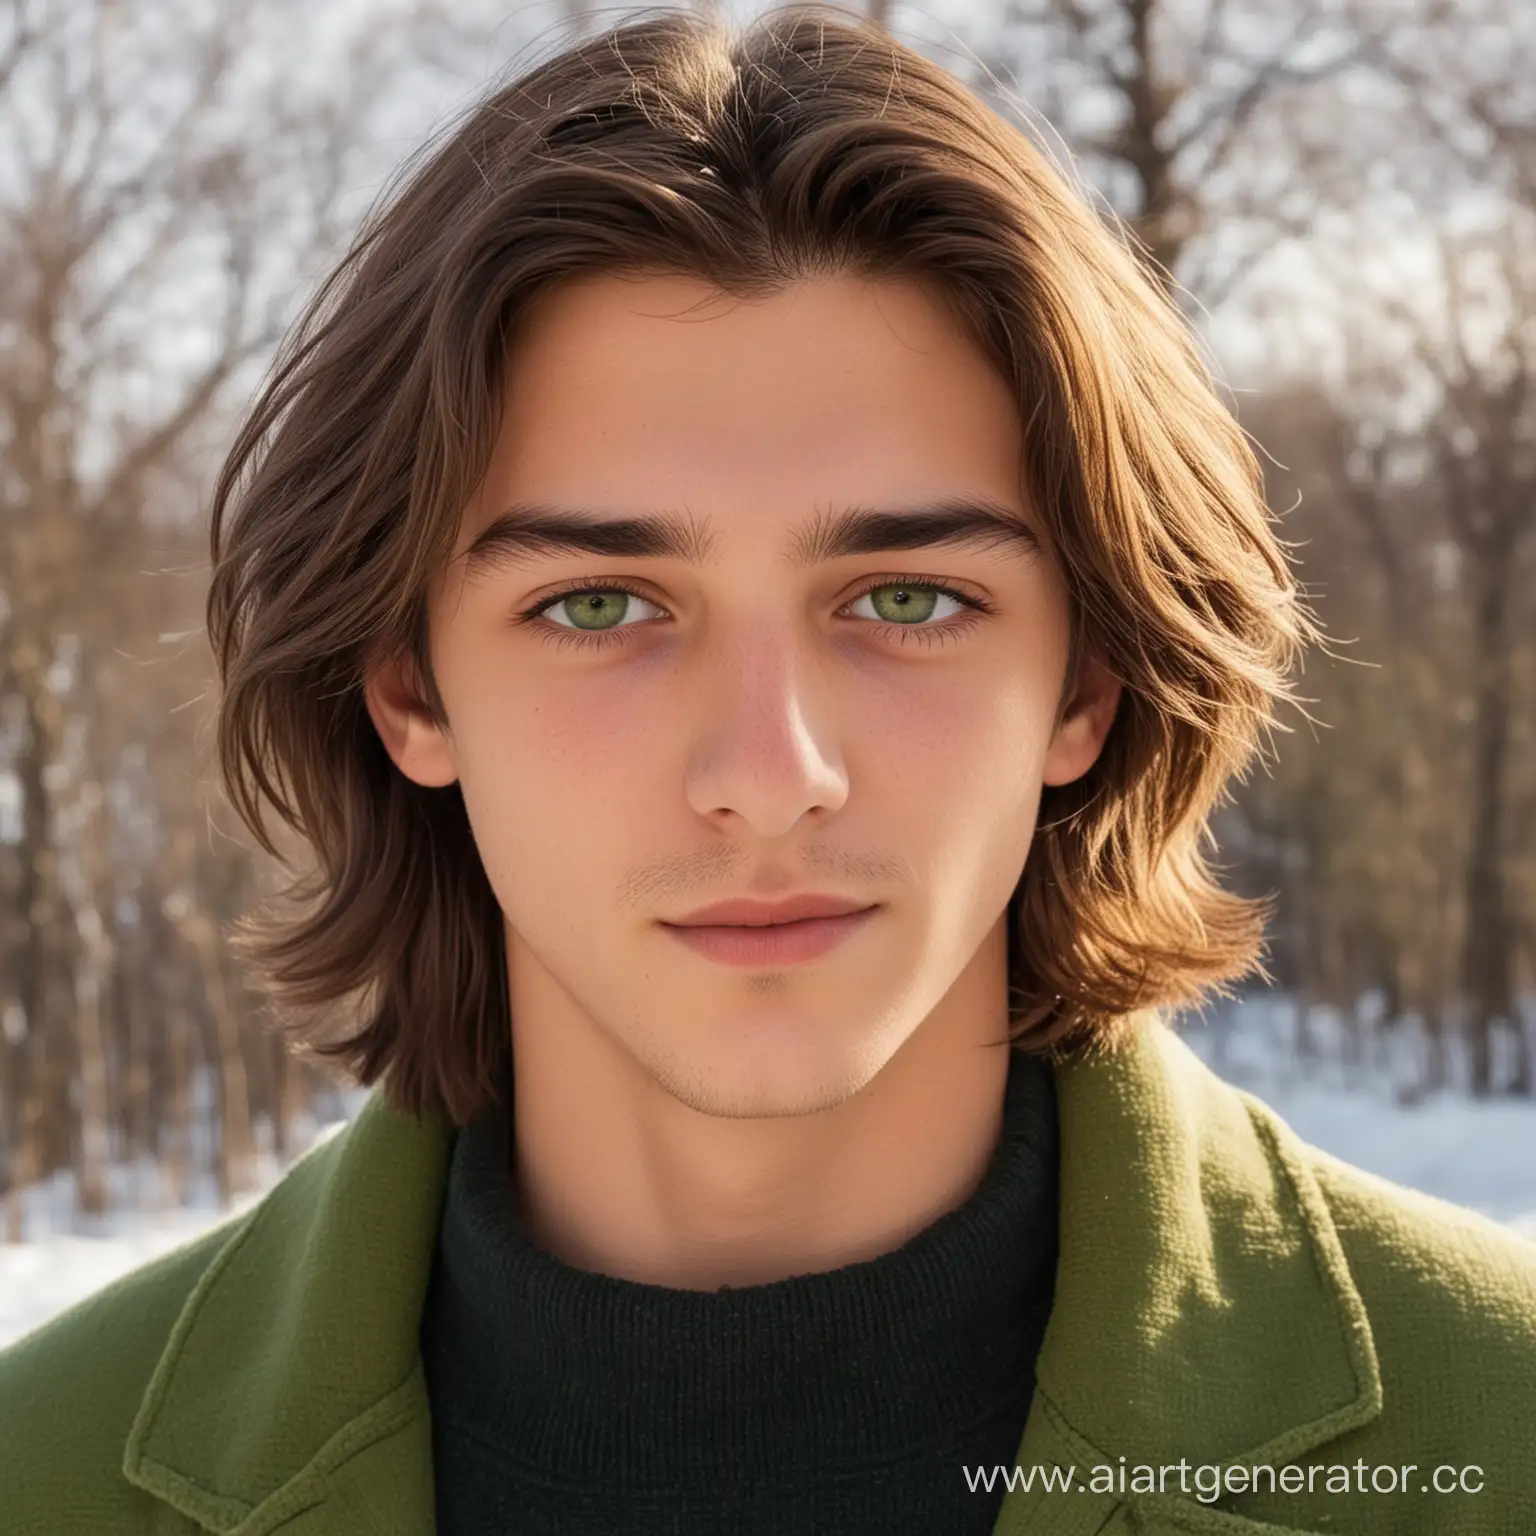 Young-Brunette-with-LightGreen-Eyes-in-Warm-Attire